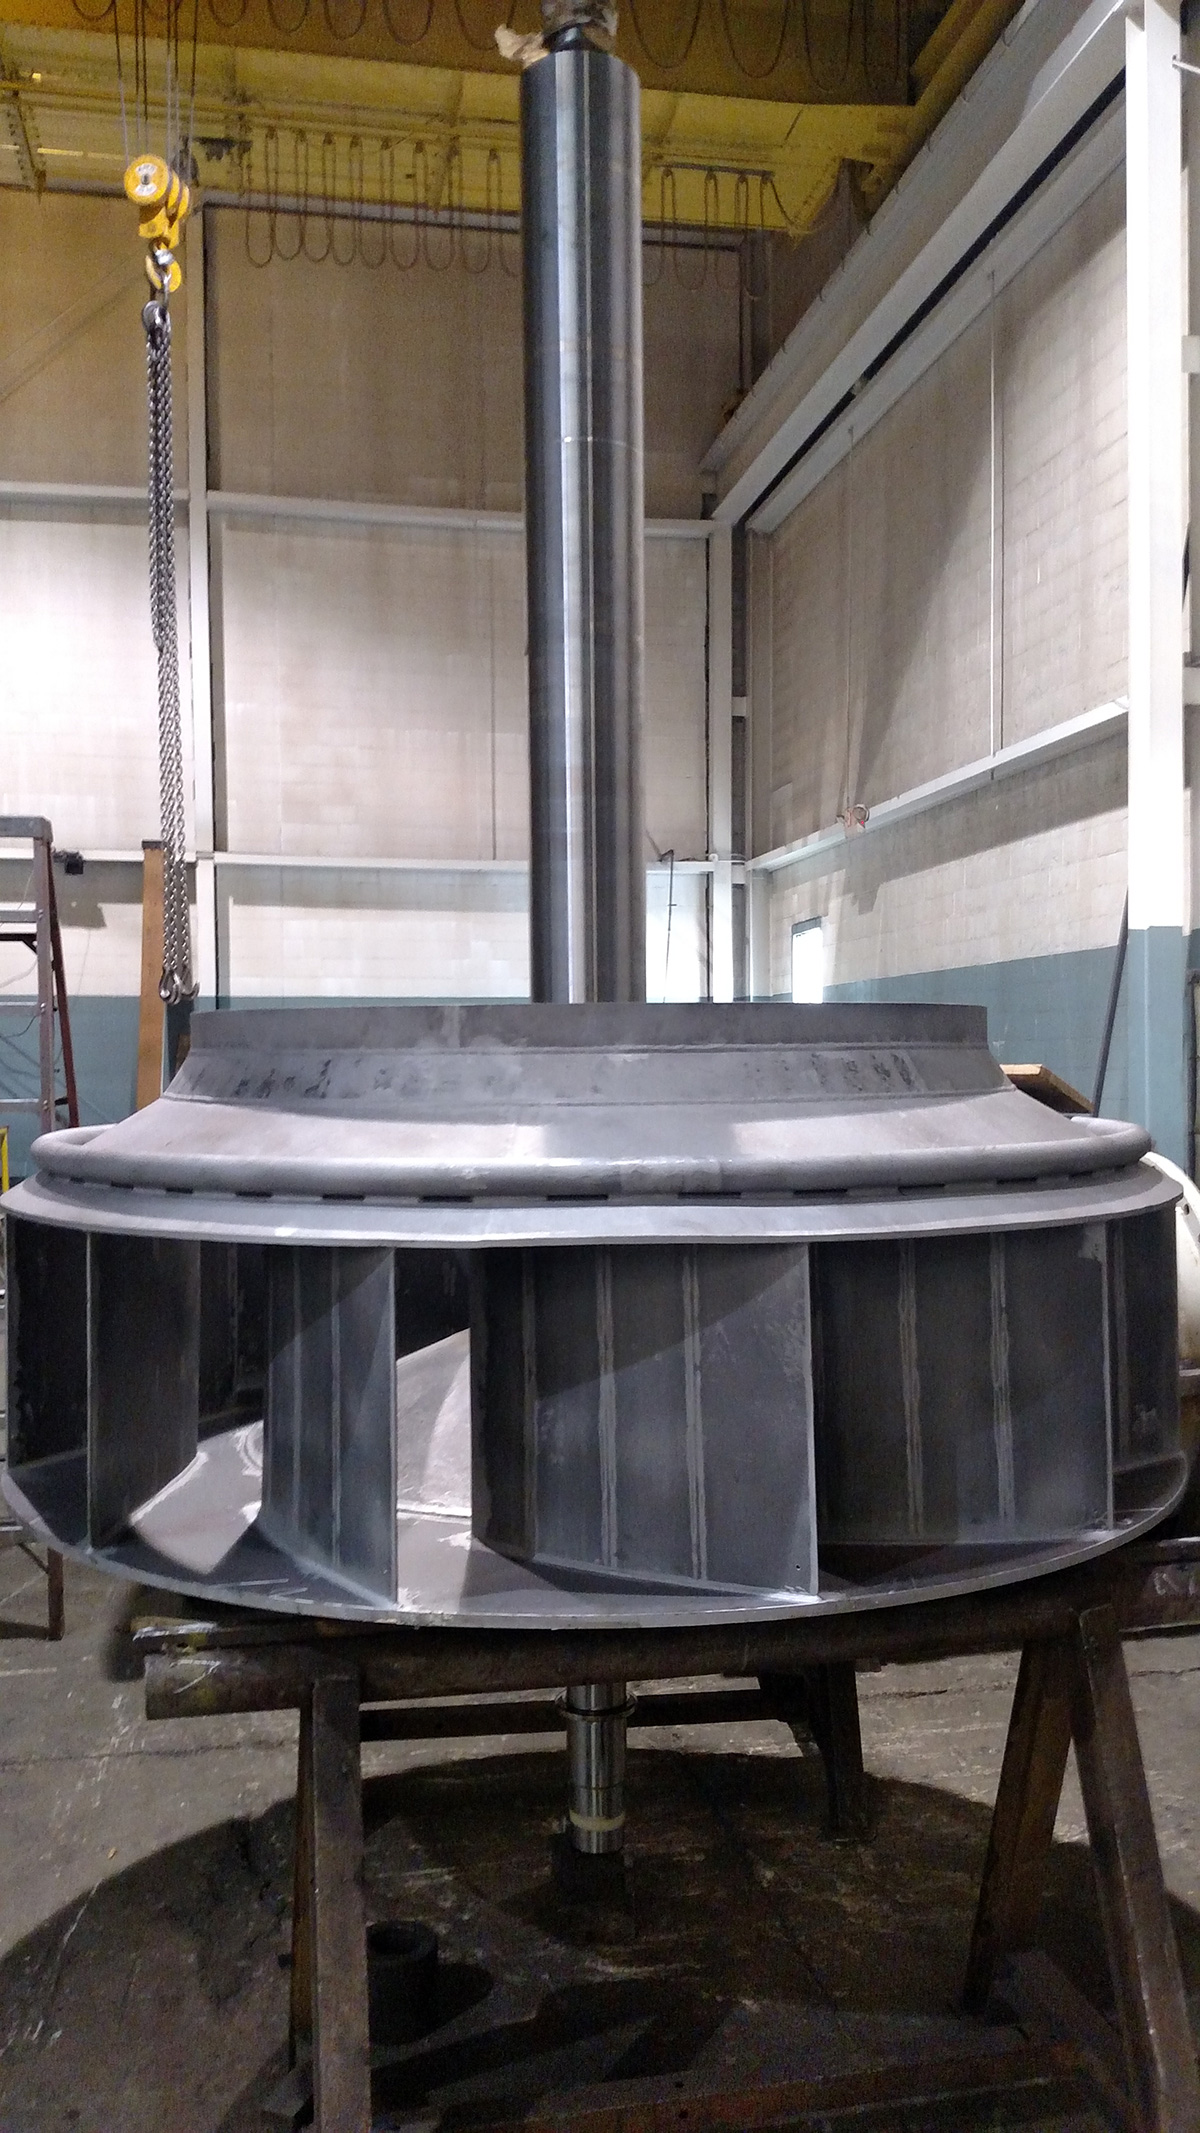 Dia-radial-fan-fabricated-and-assembled-at-jj-mach